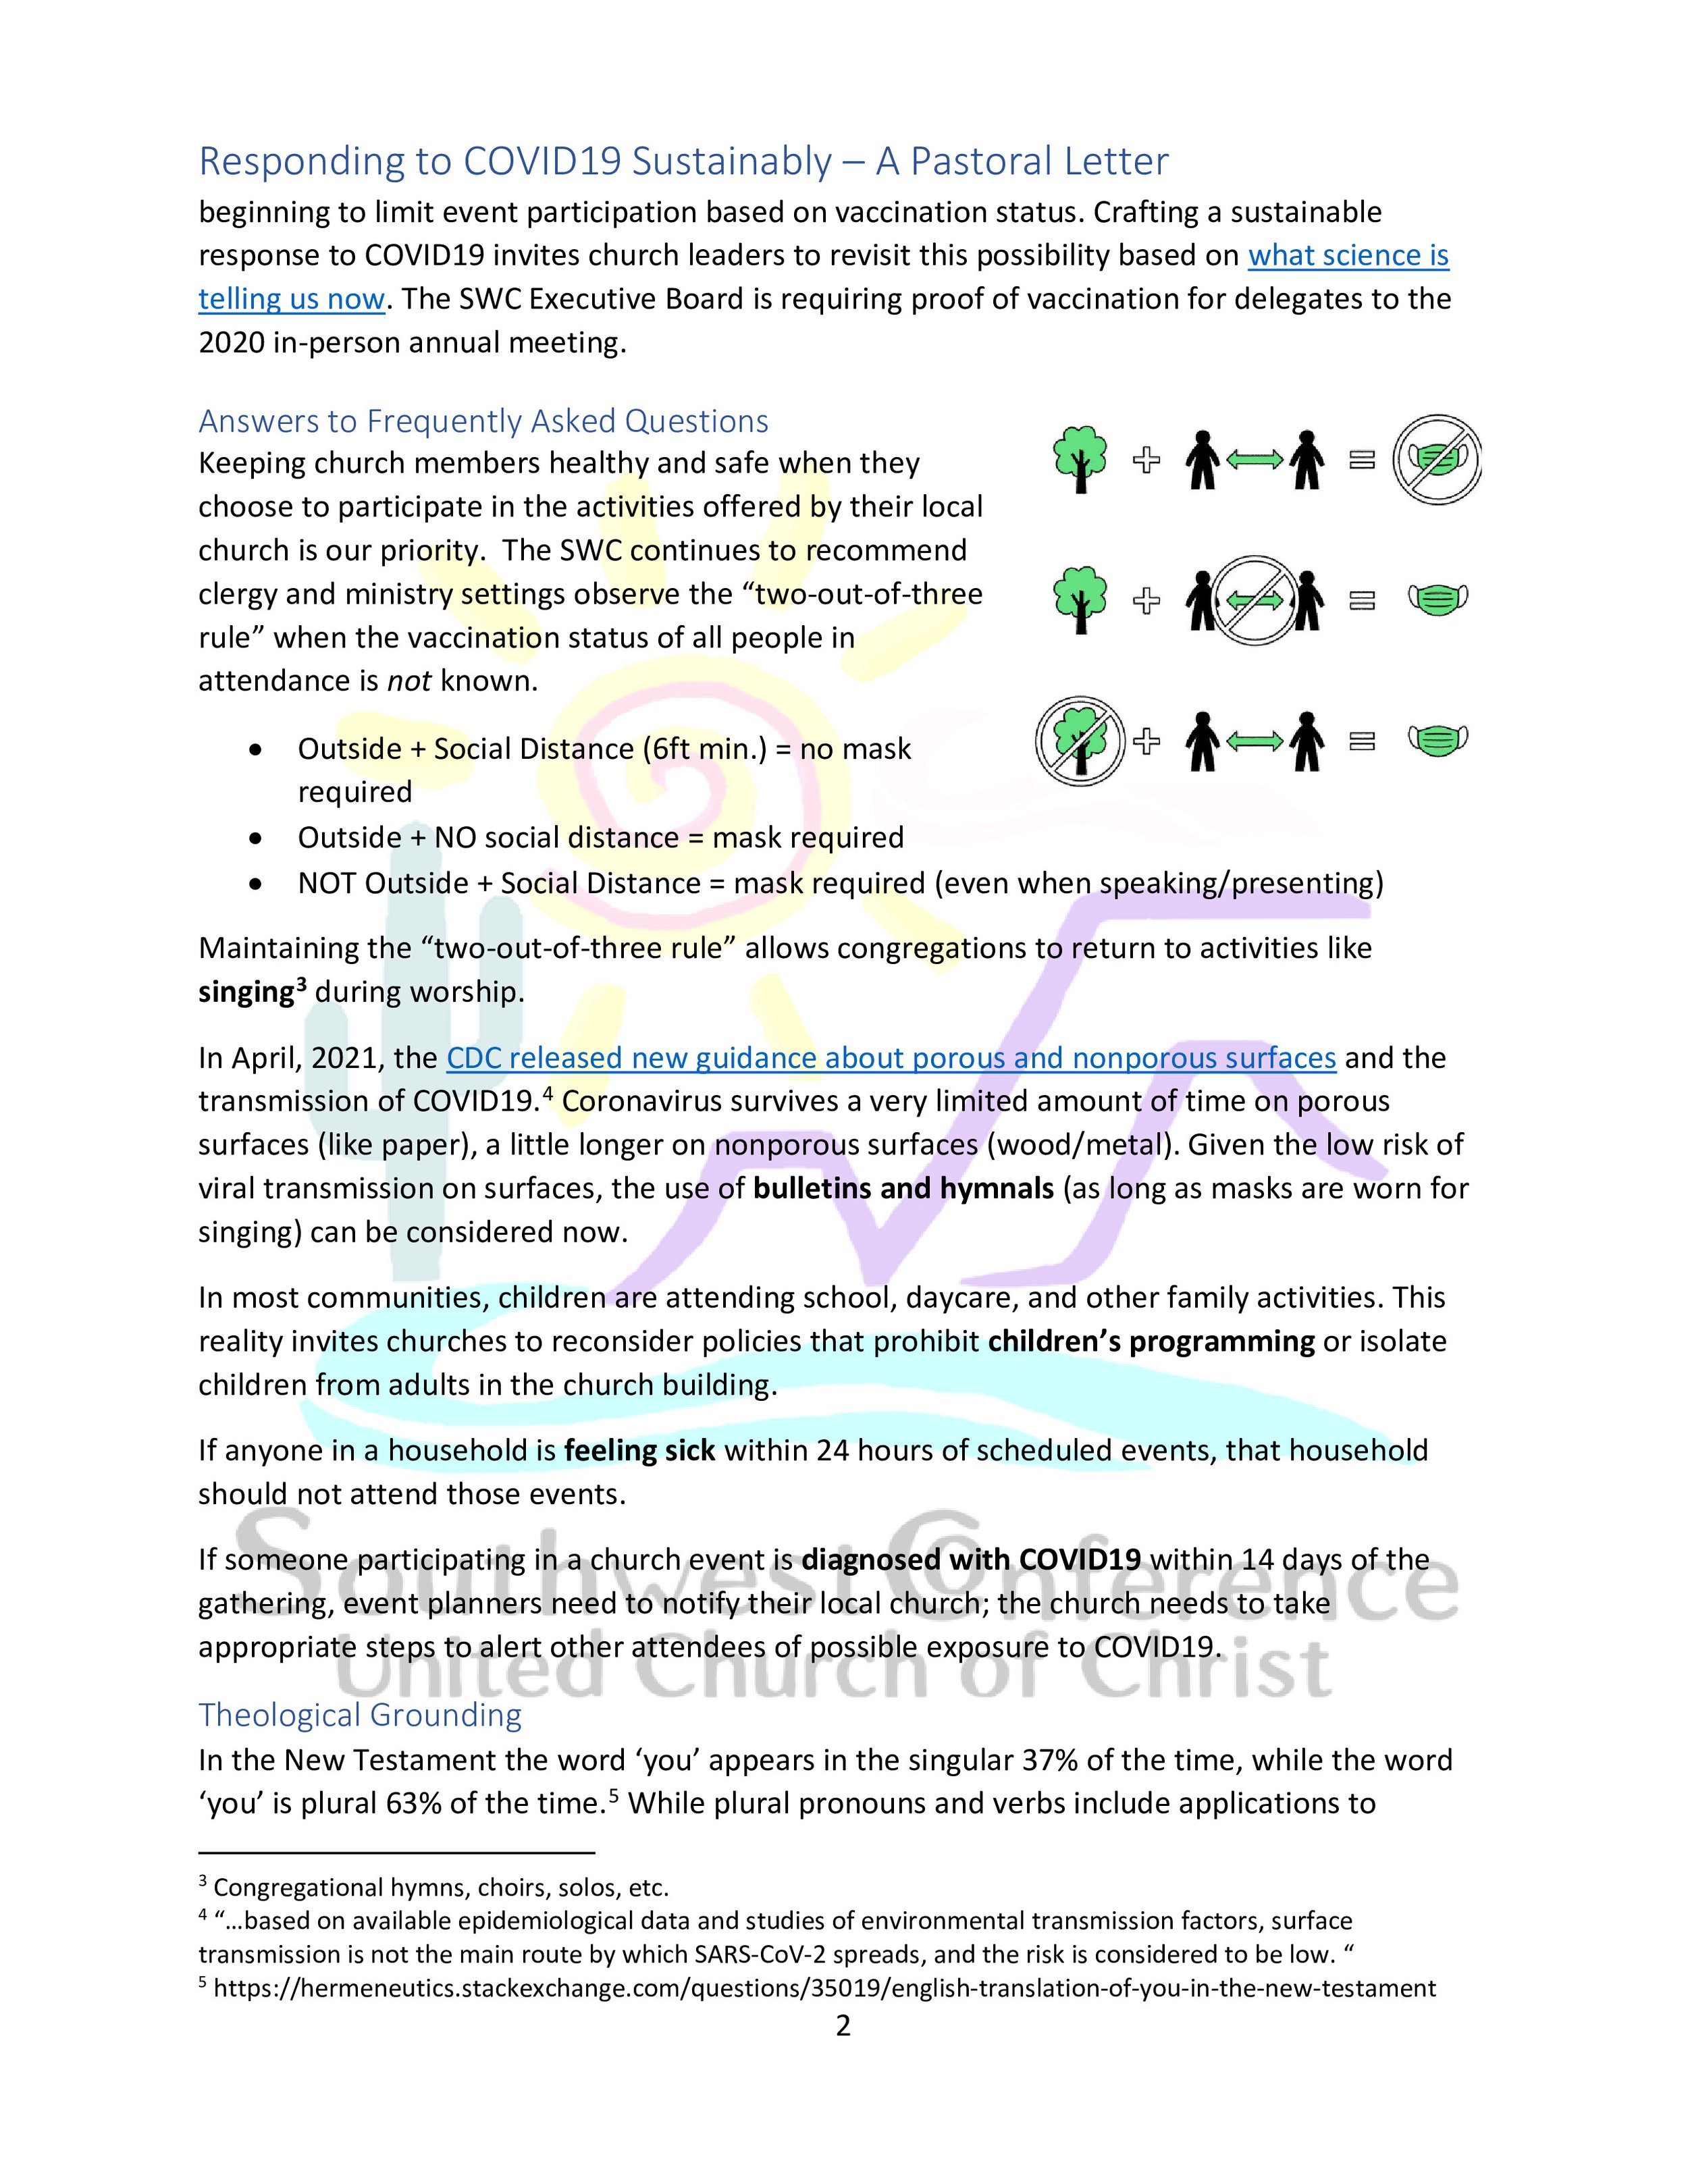 Sustainable Response to COVID19 - a pastoral letter page 2.jpg